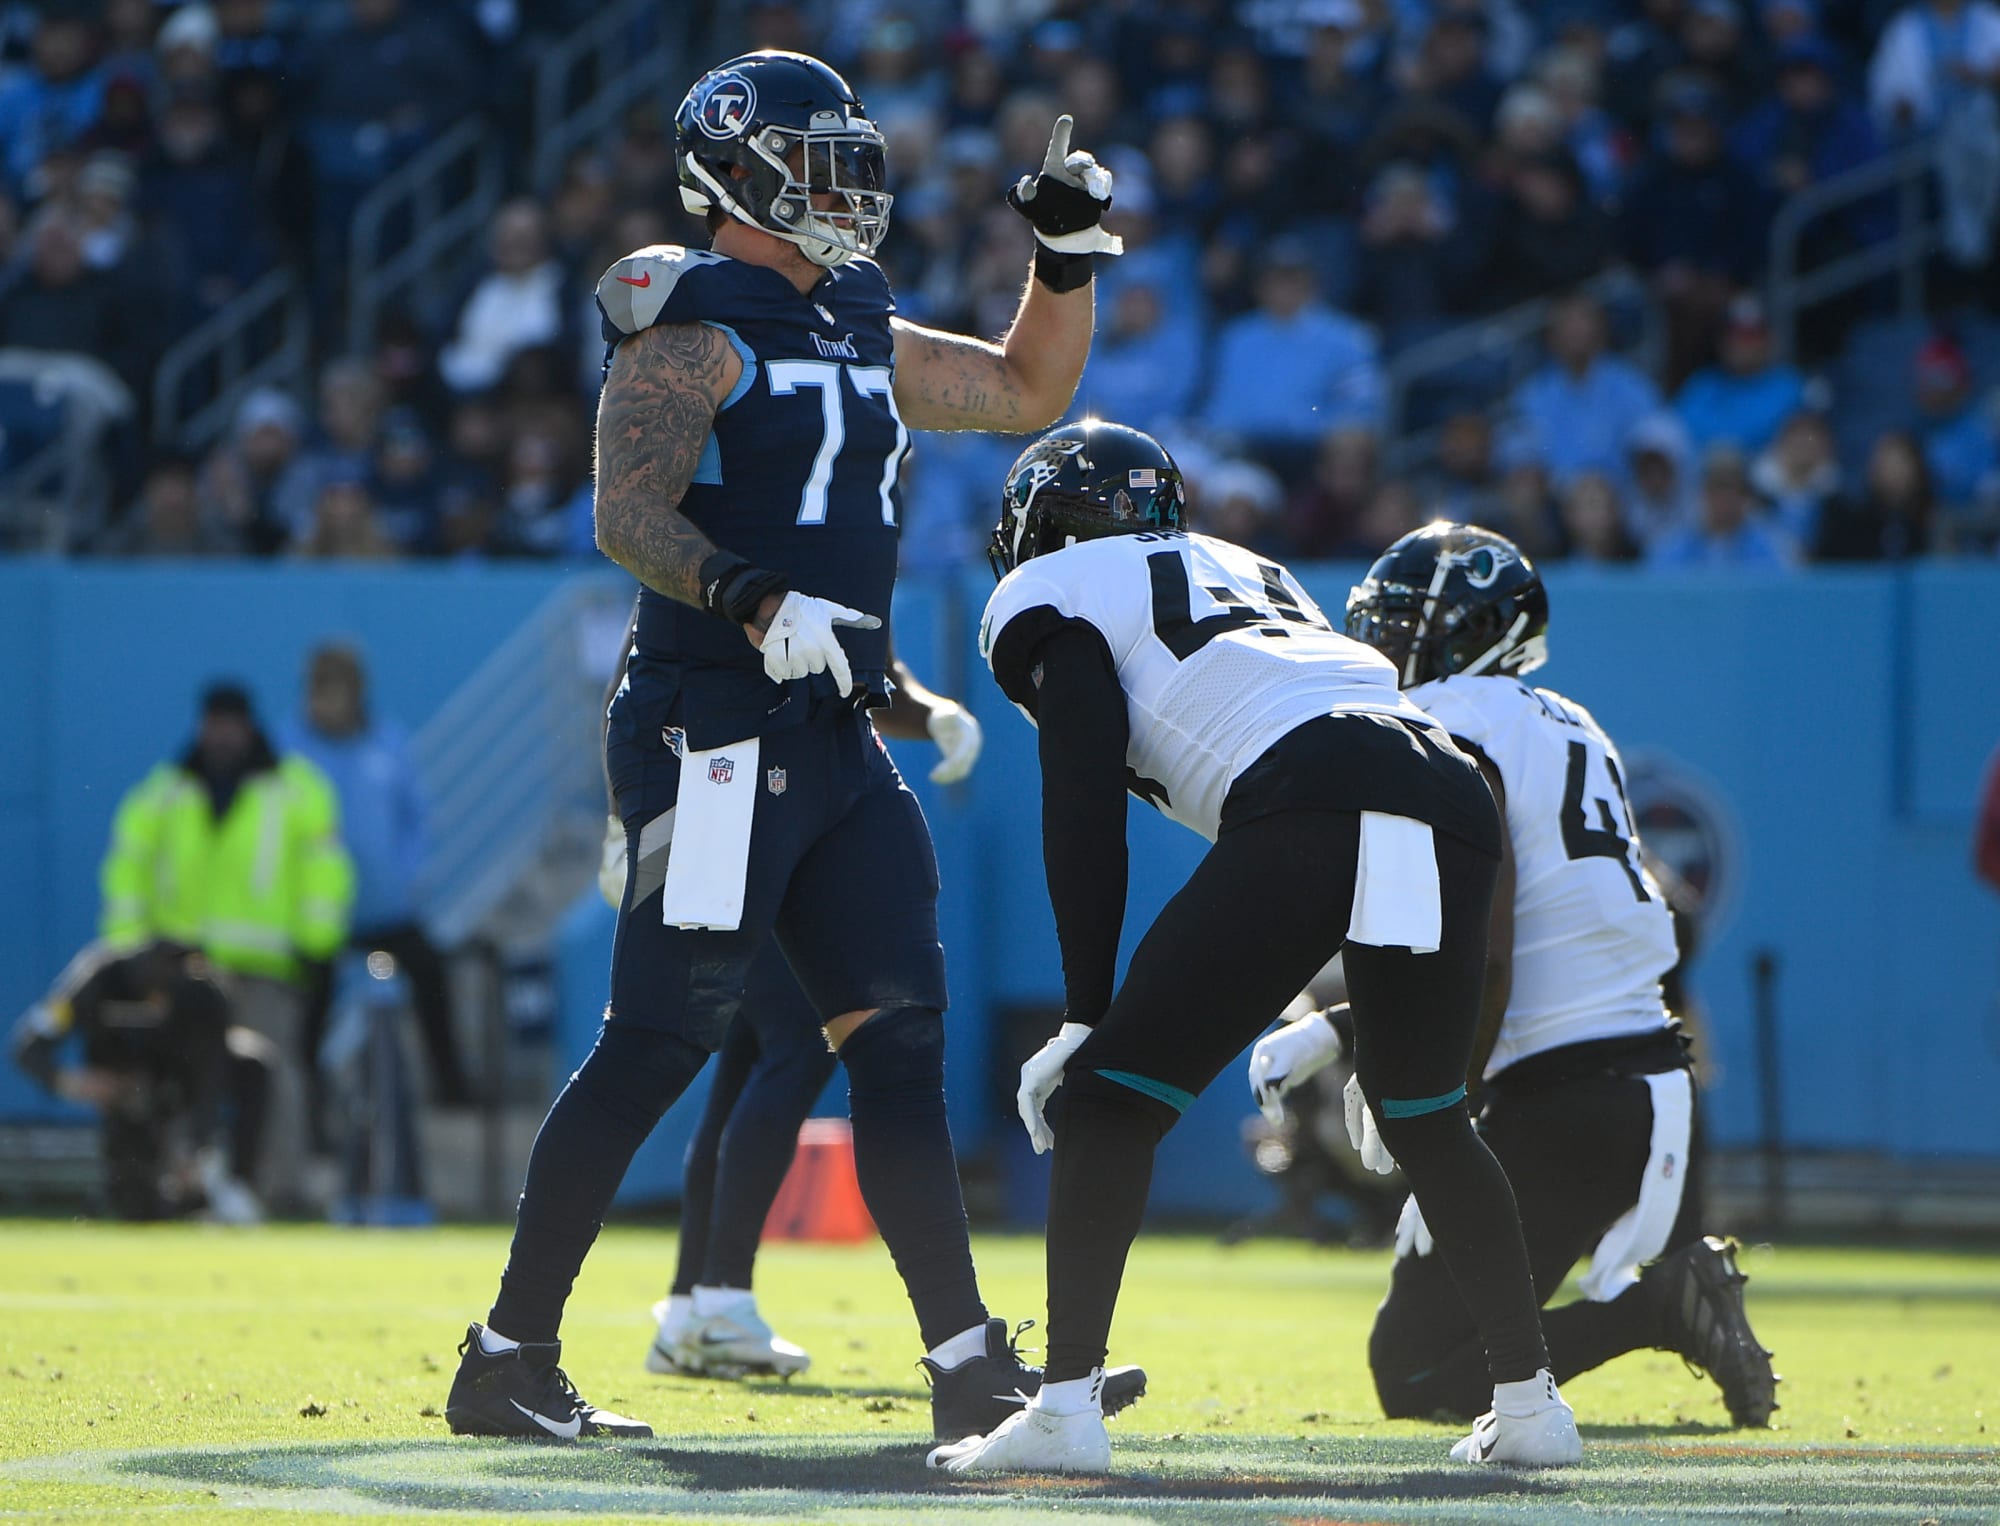 The lesson the Tennessee Titans should take from the NFL playoffs